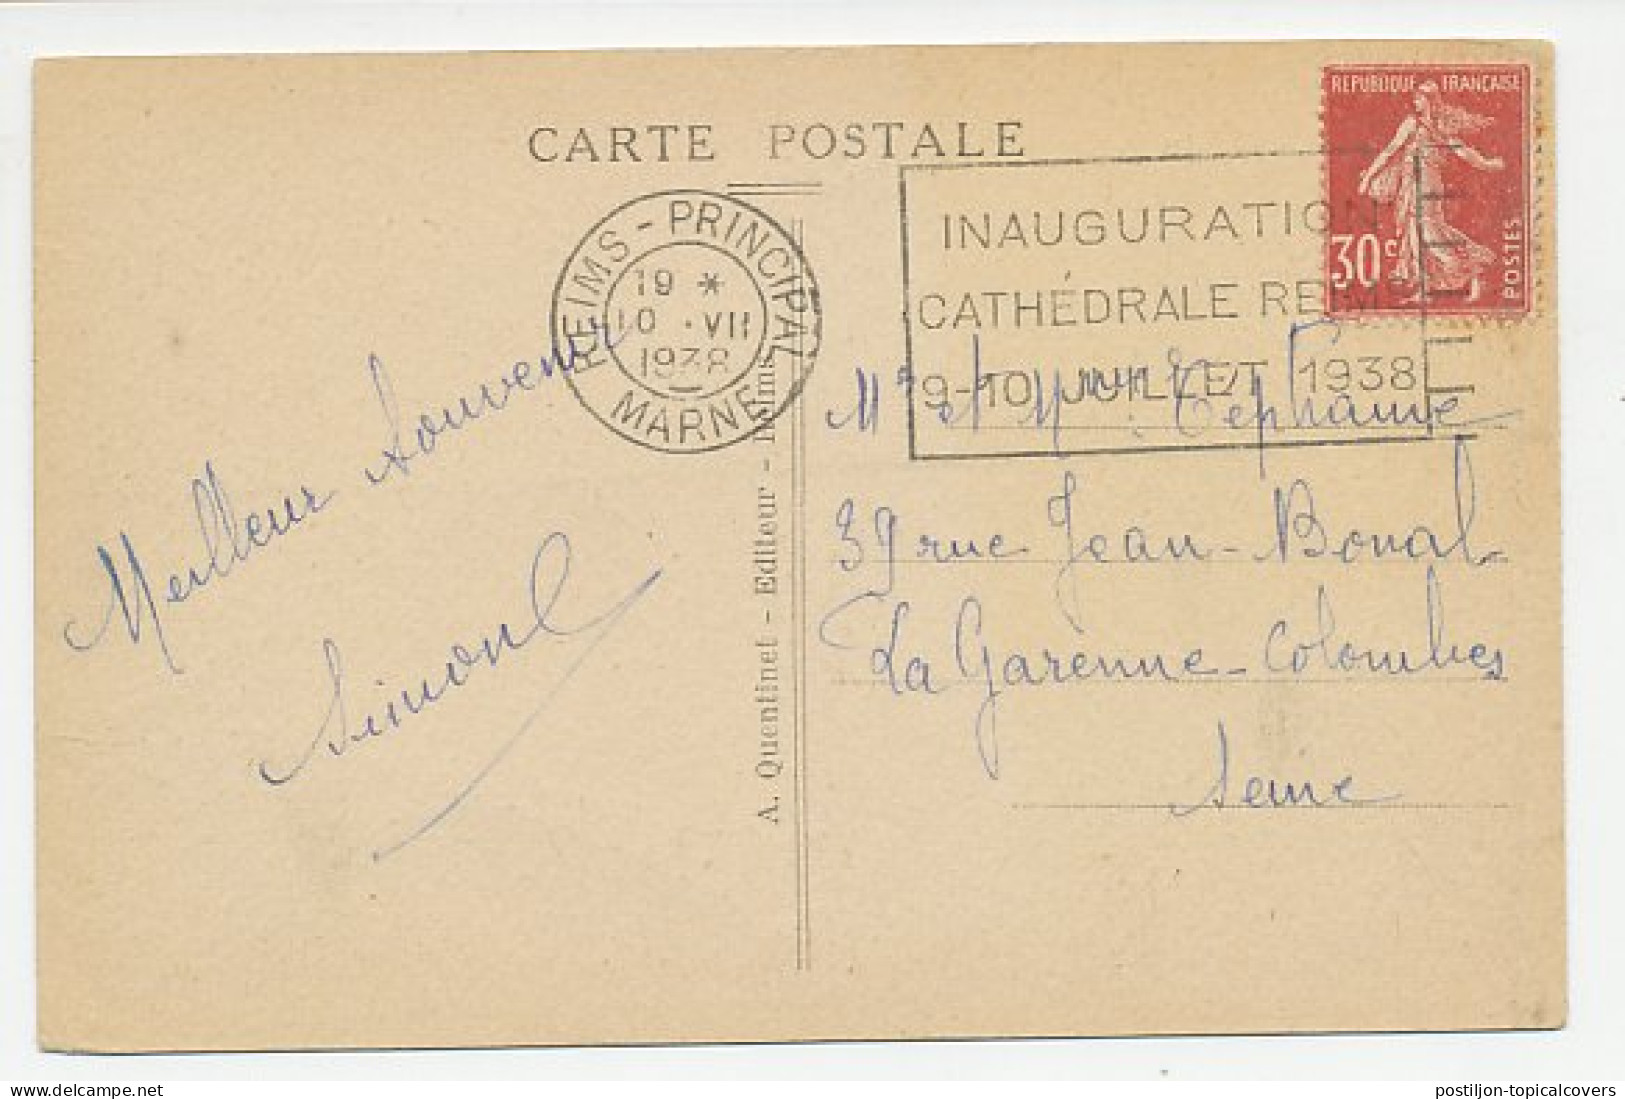 Postcard / Postmark France 1938 Cathedral Reims - Inauguration - Churches & Cathedrals